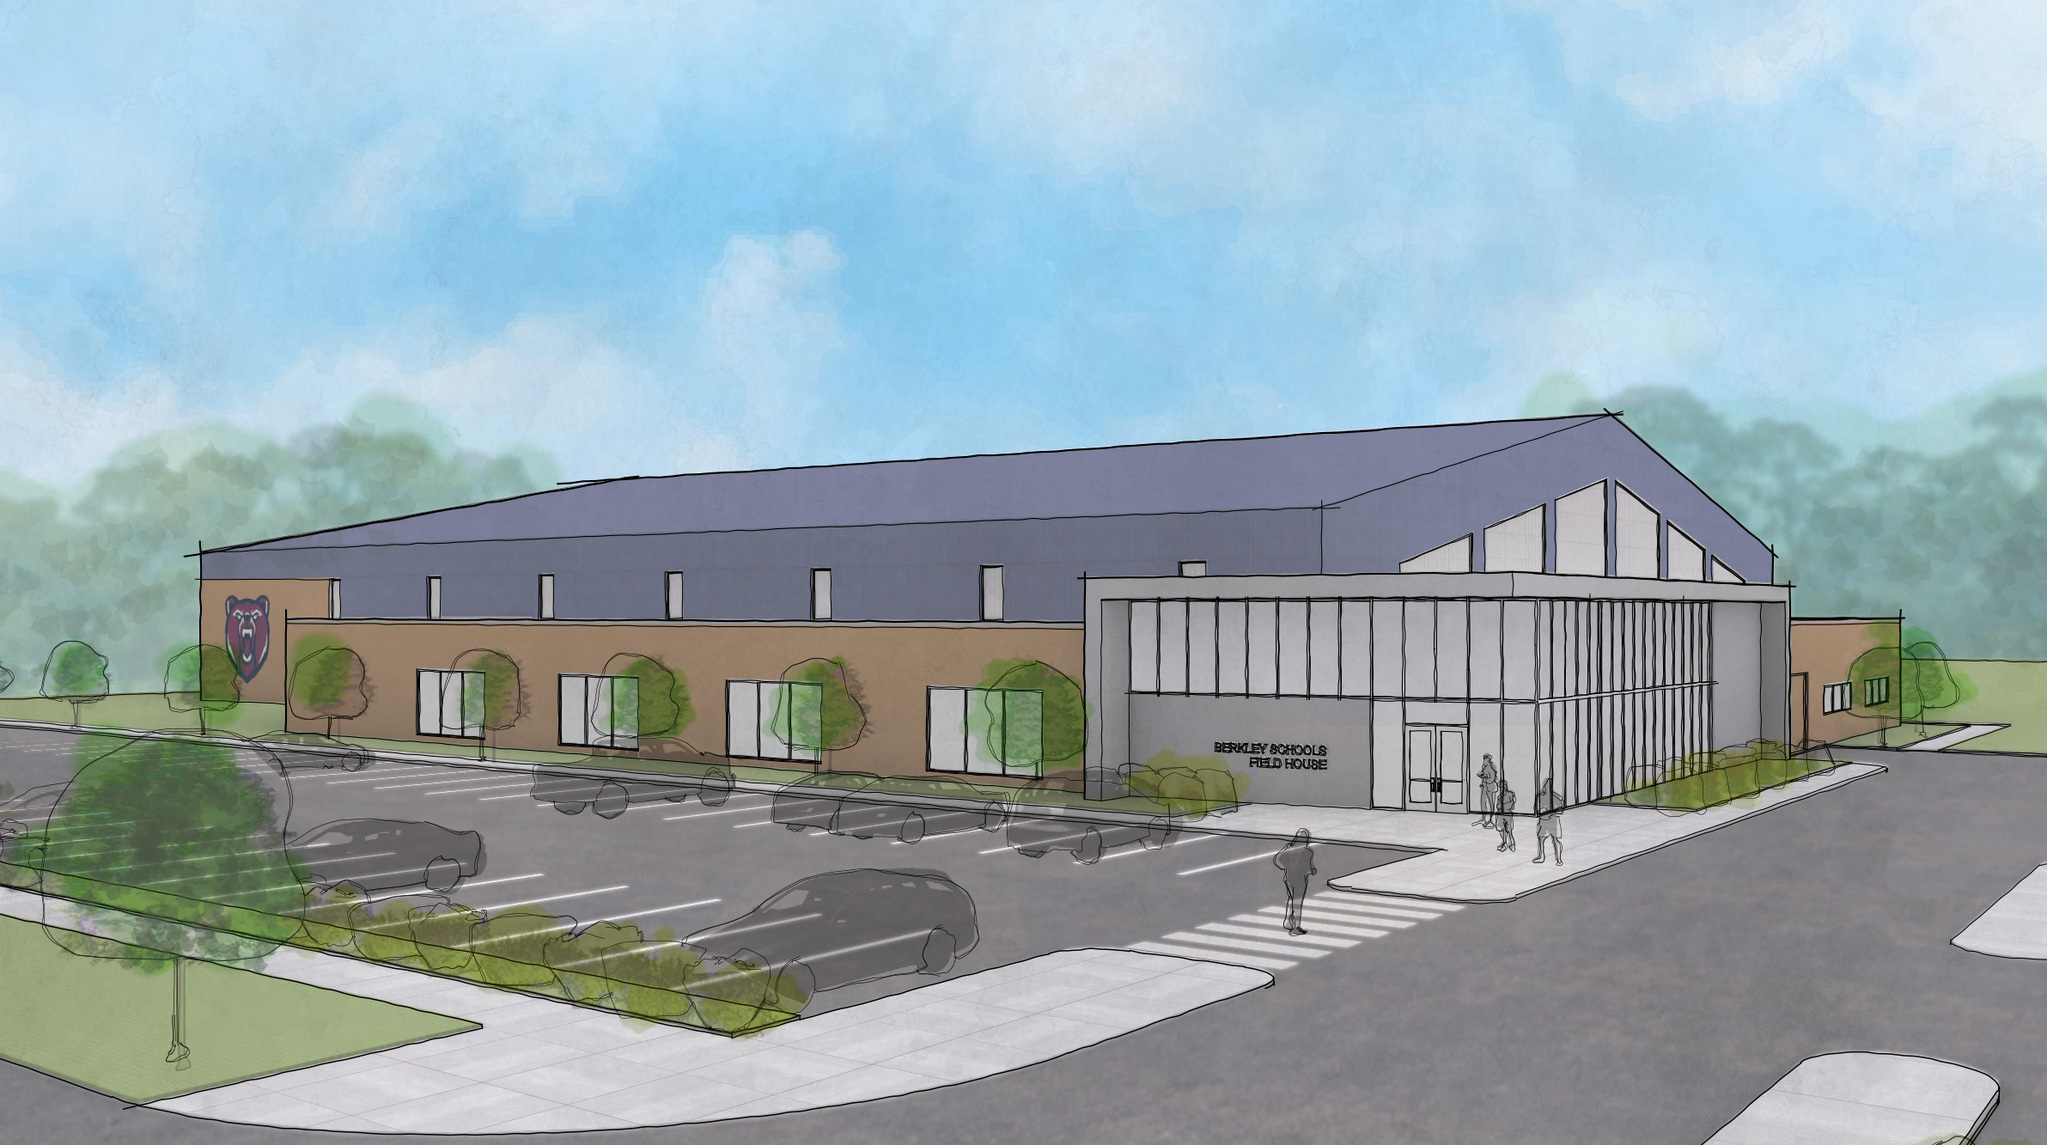 Architectural conceptual rendering of a 75-yard indoor practice field house.